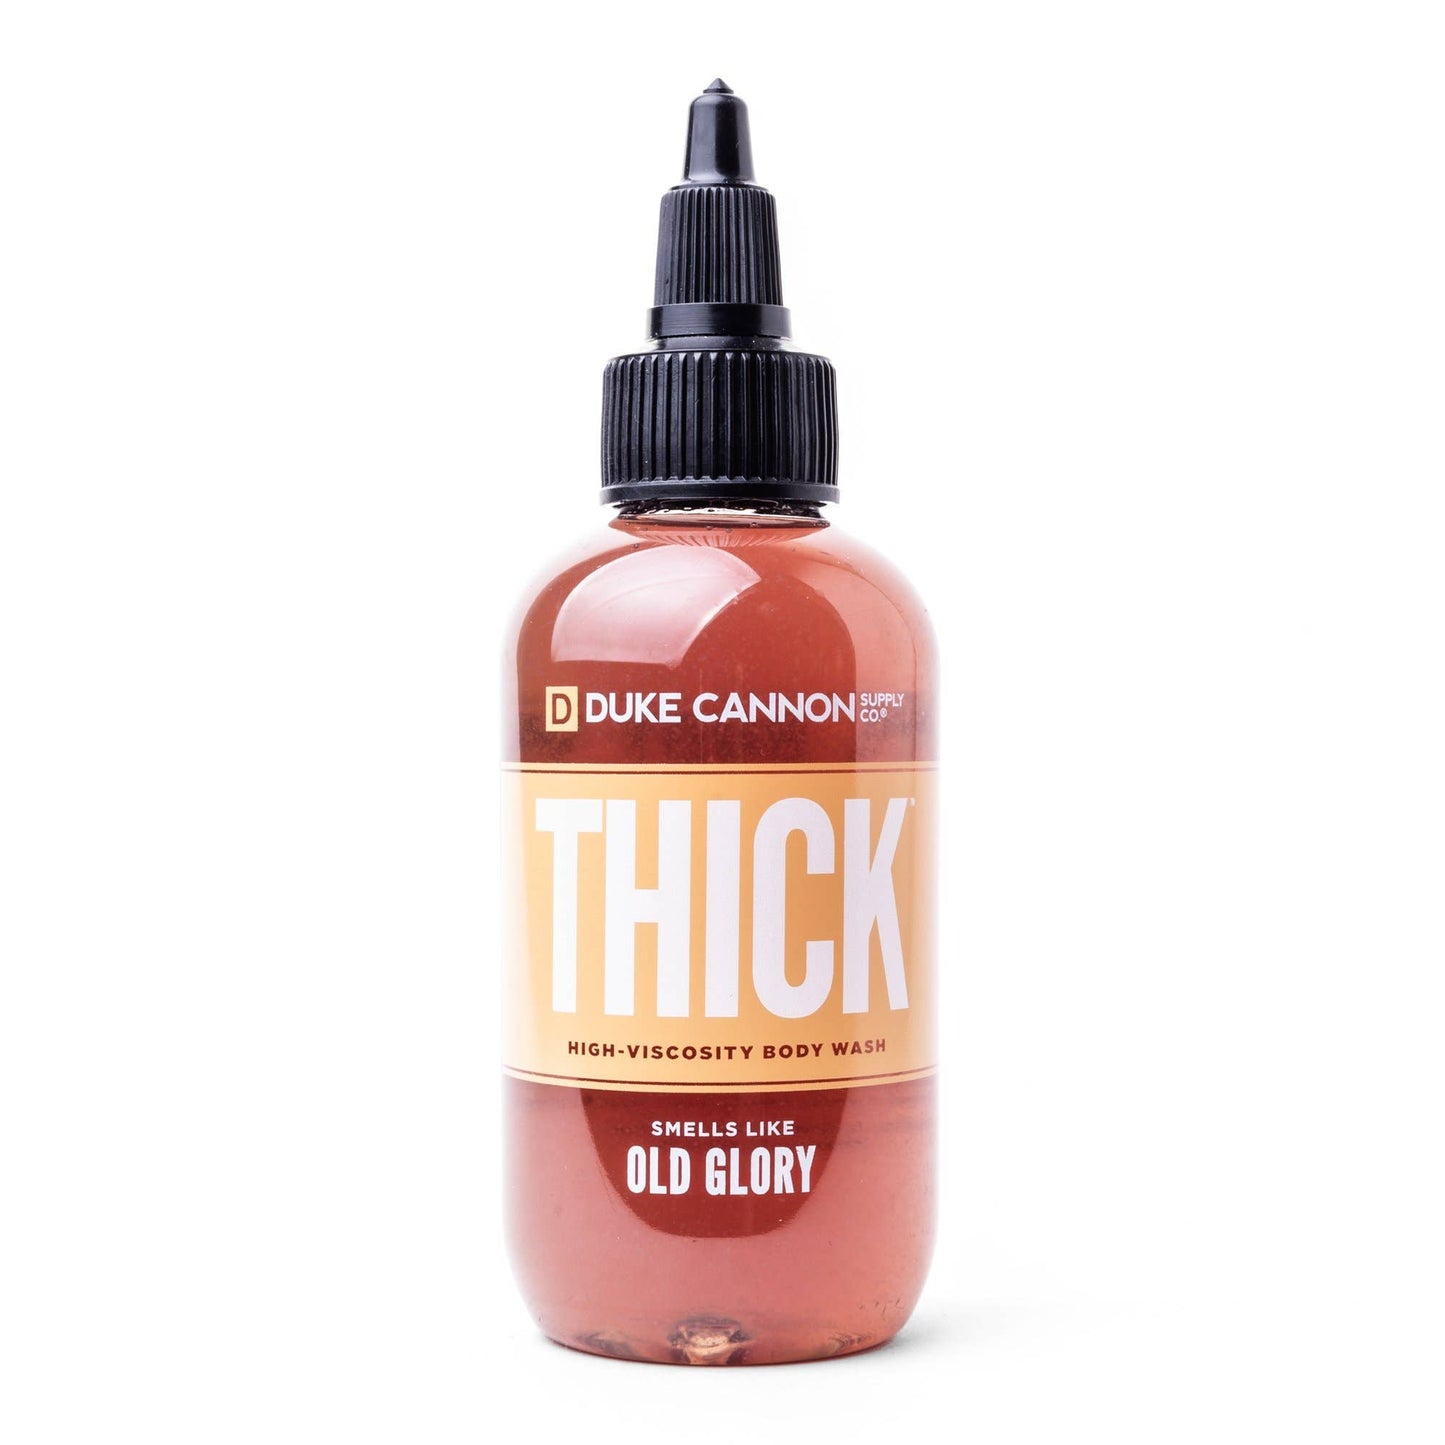 Thick Body Wash Travel Size - Old Glory Self-Care Duke Cannon   